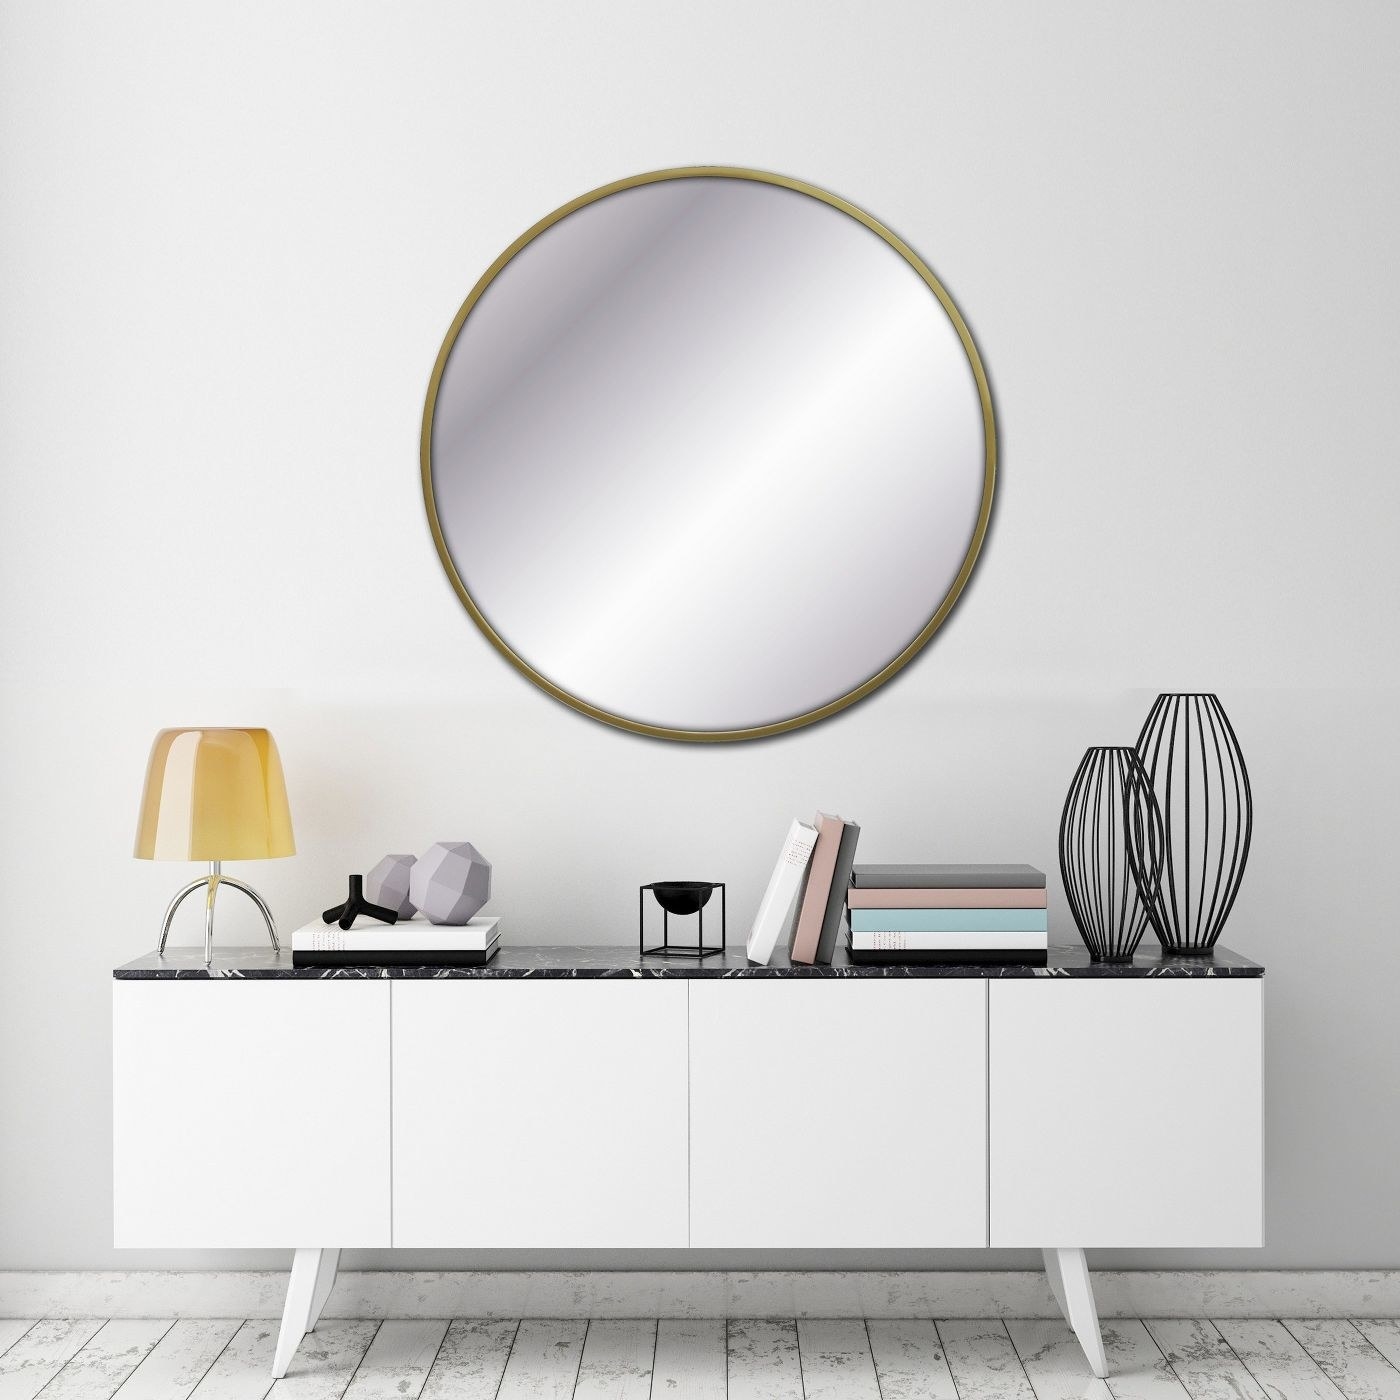 A round decorative wall mirror hanging above a console table 